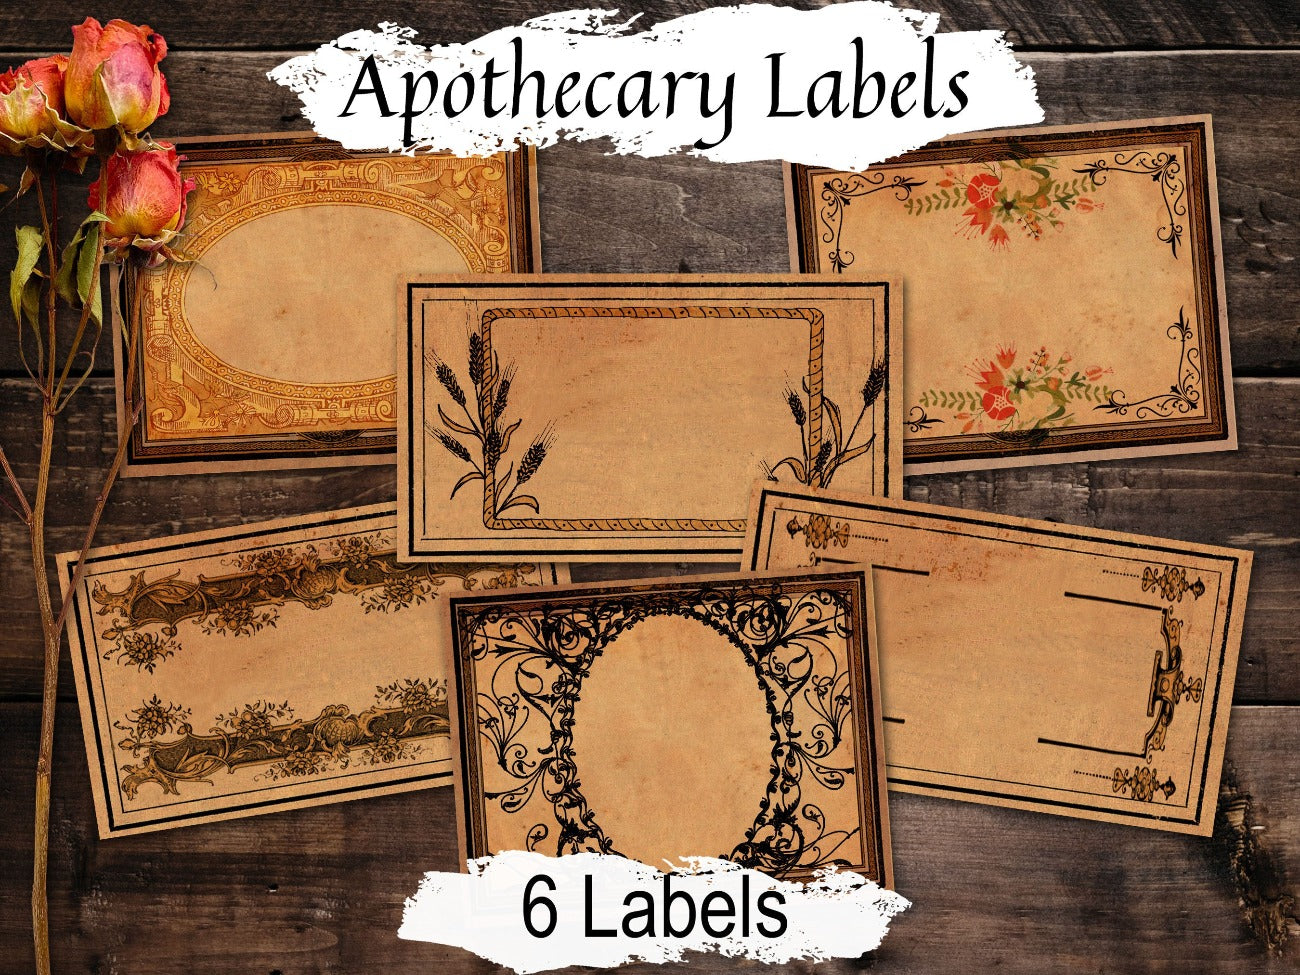 VINTAGE APOTHECARY LABELS, 6 Blank Labels, Spell Potion Labels, Aromatherapy Labels, Witchcraft, Wicca Herbal Magic Spell and Potion Labels - Morgana Magick Spell